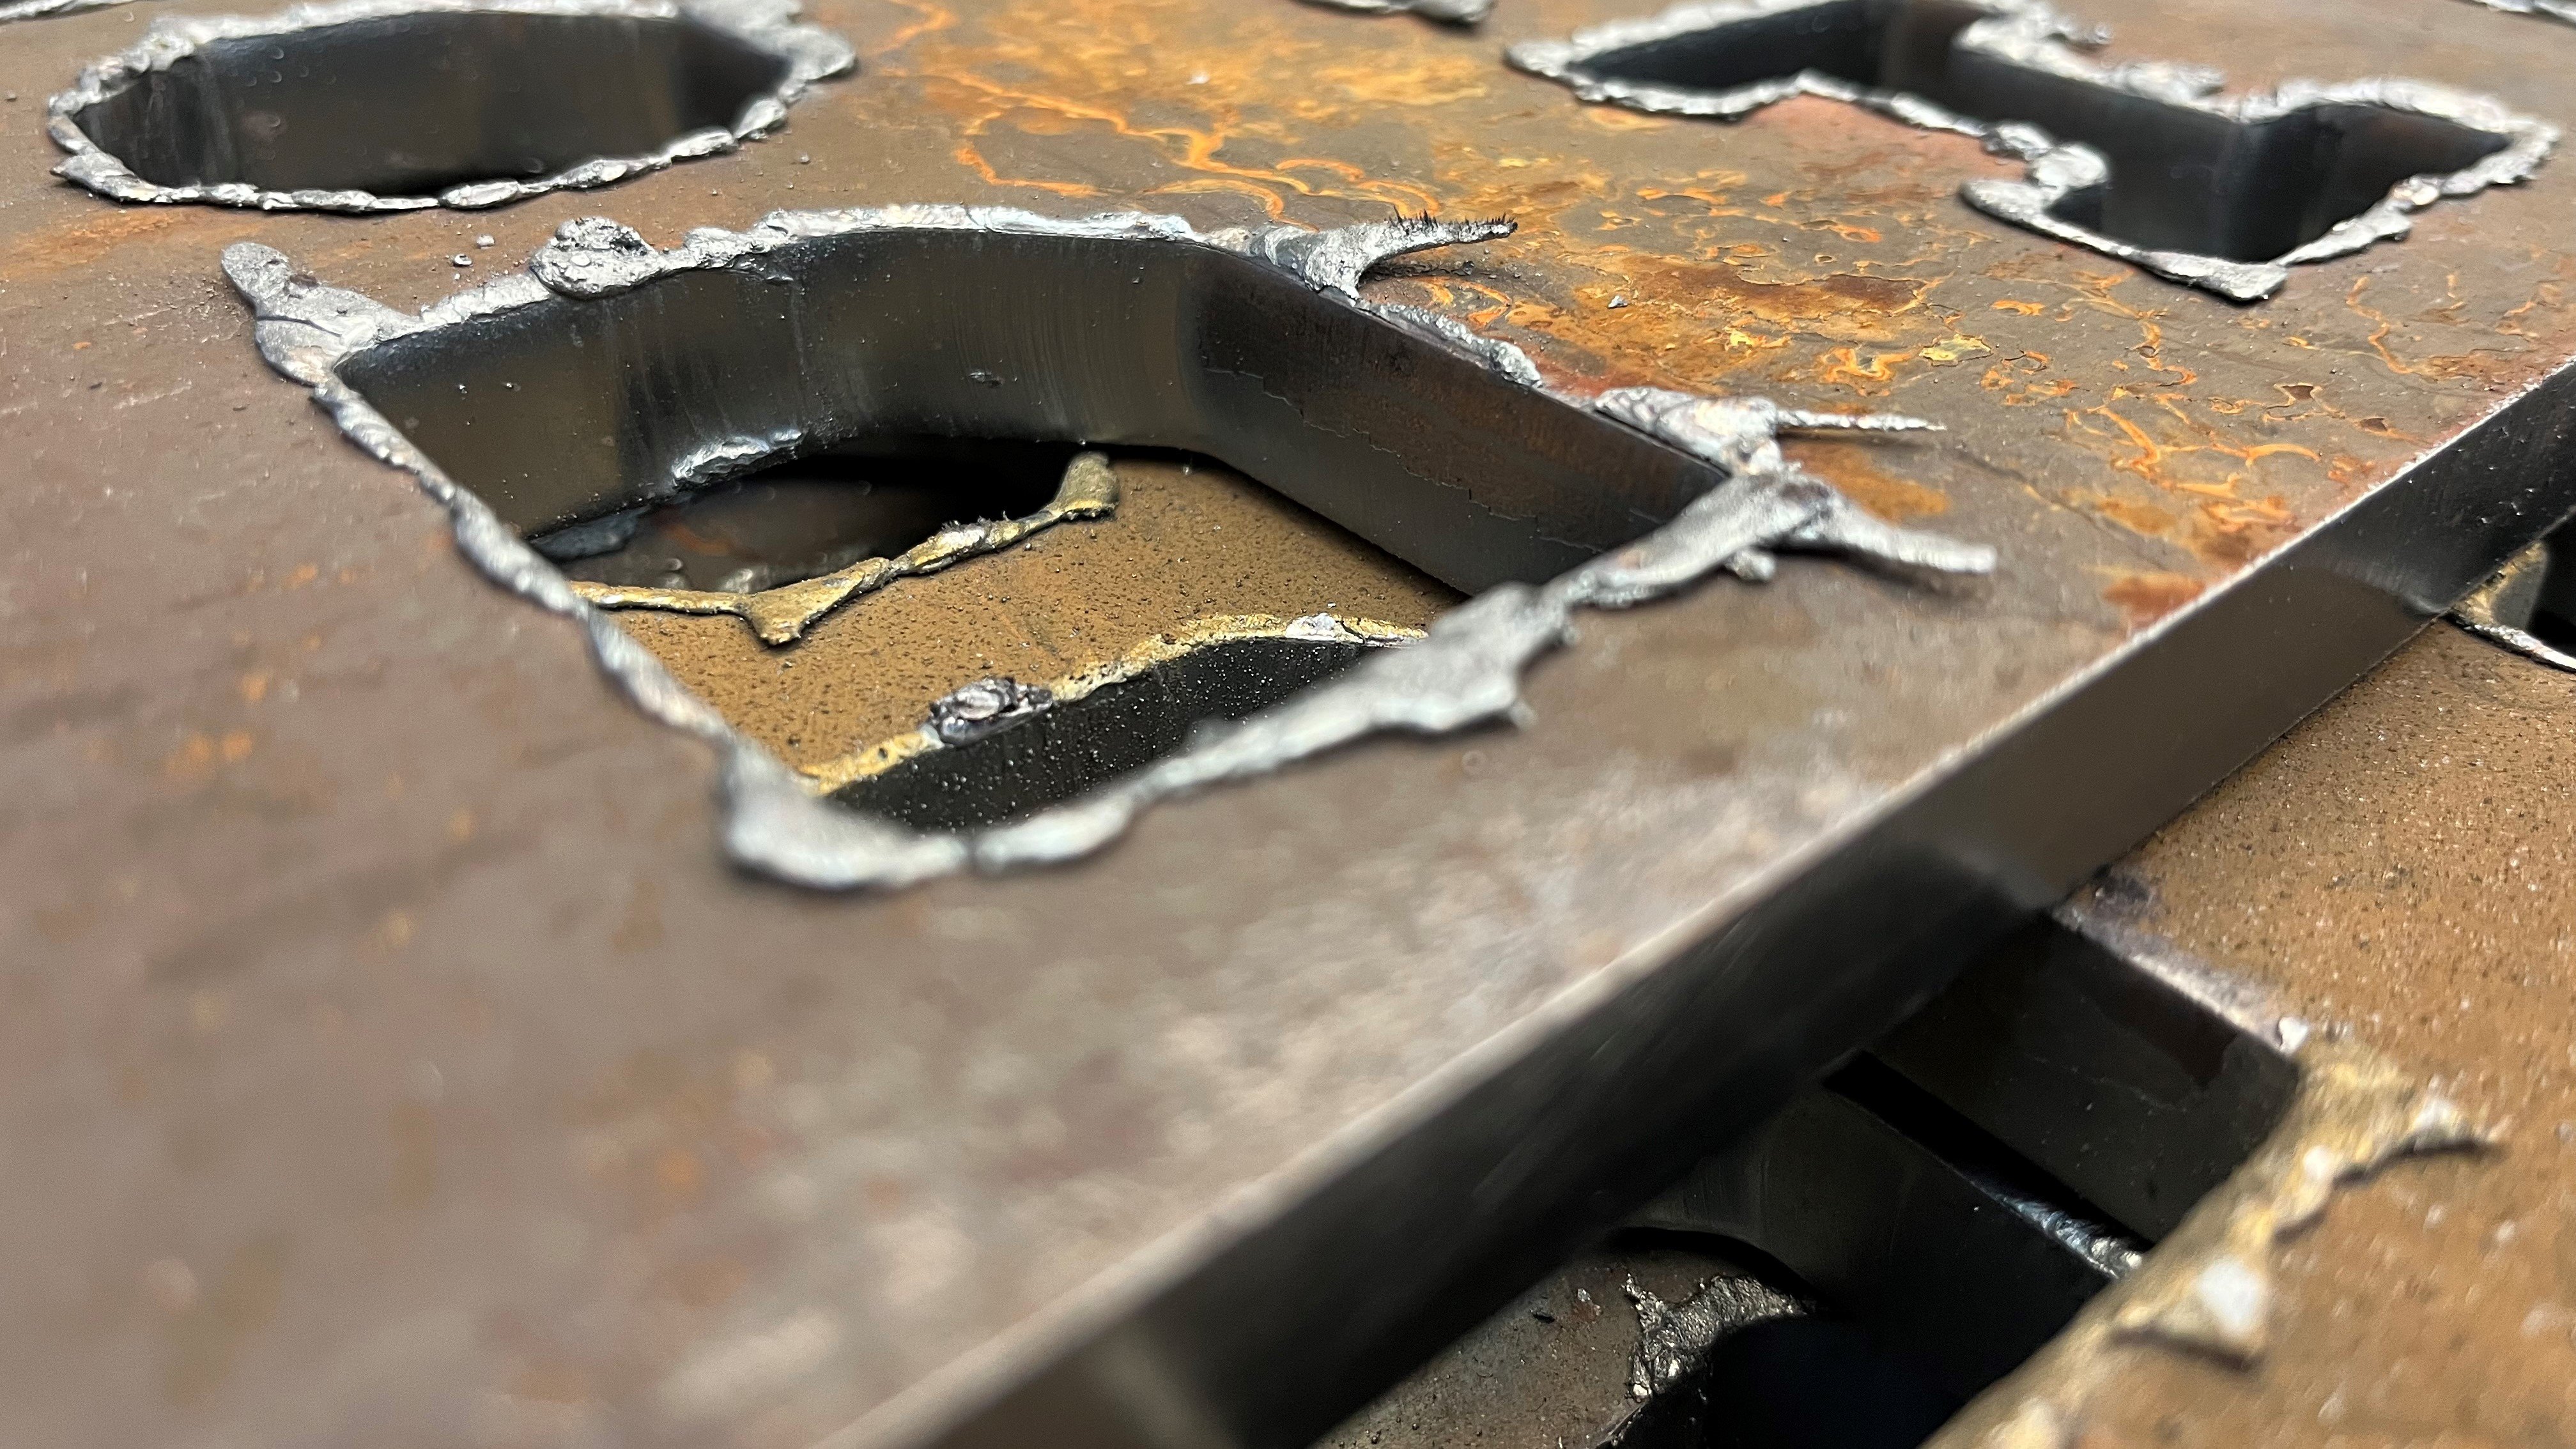 Cutting methods Part 2: Oxyfuel Flame Cutting